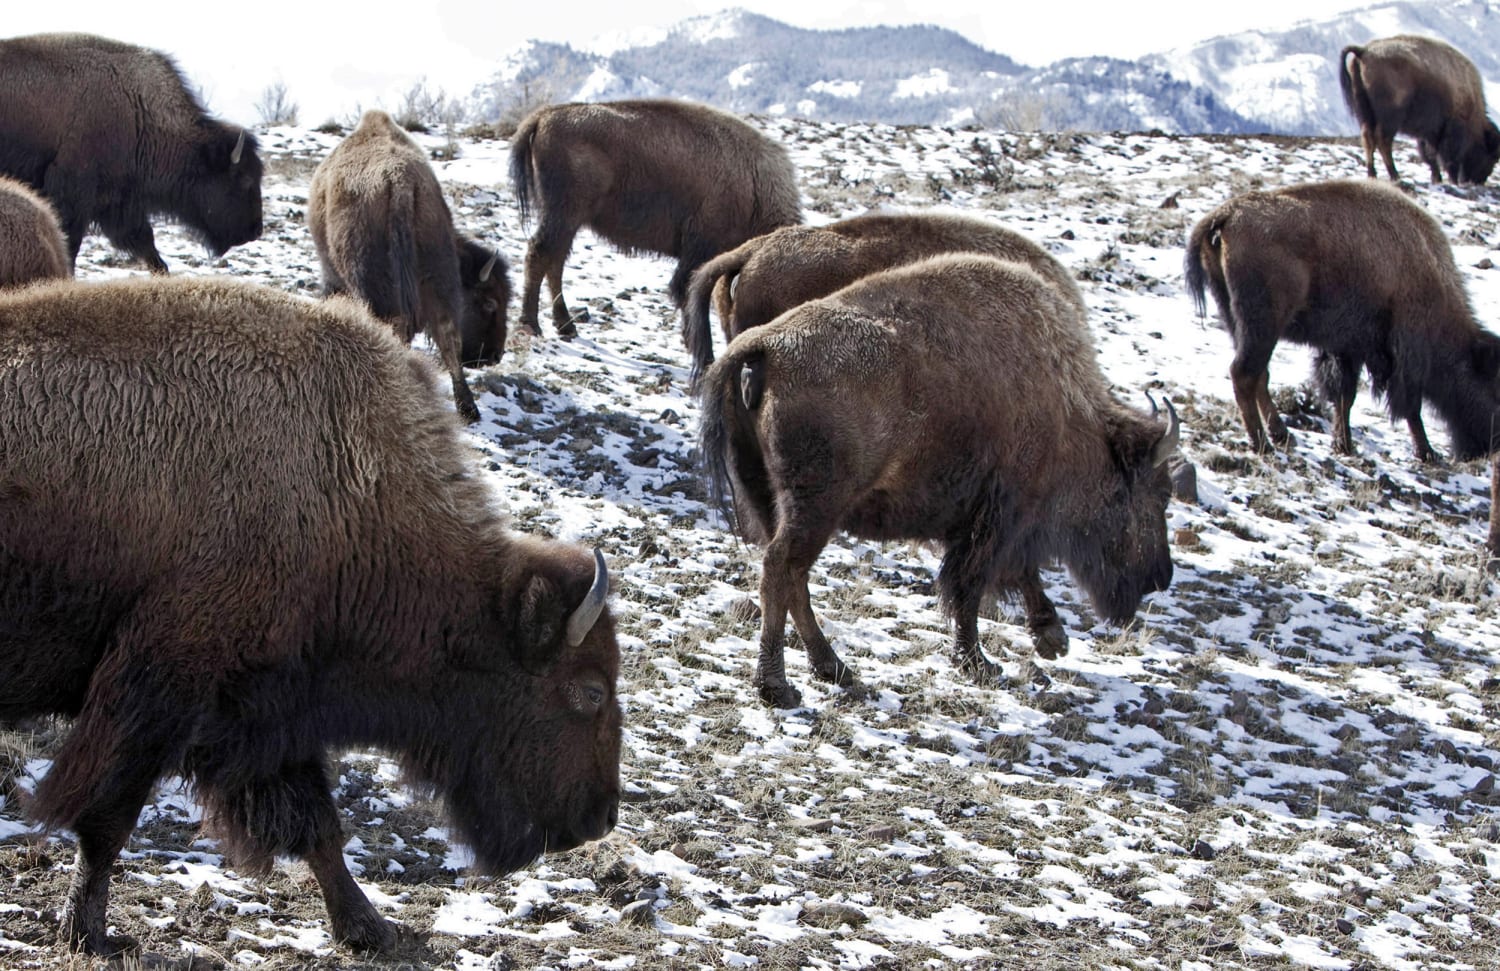 900 bison at Yellowstone to be relocated, slaughtered or shot by hunters this winter